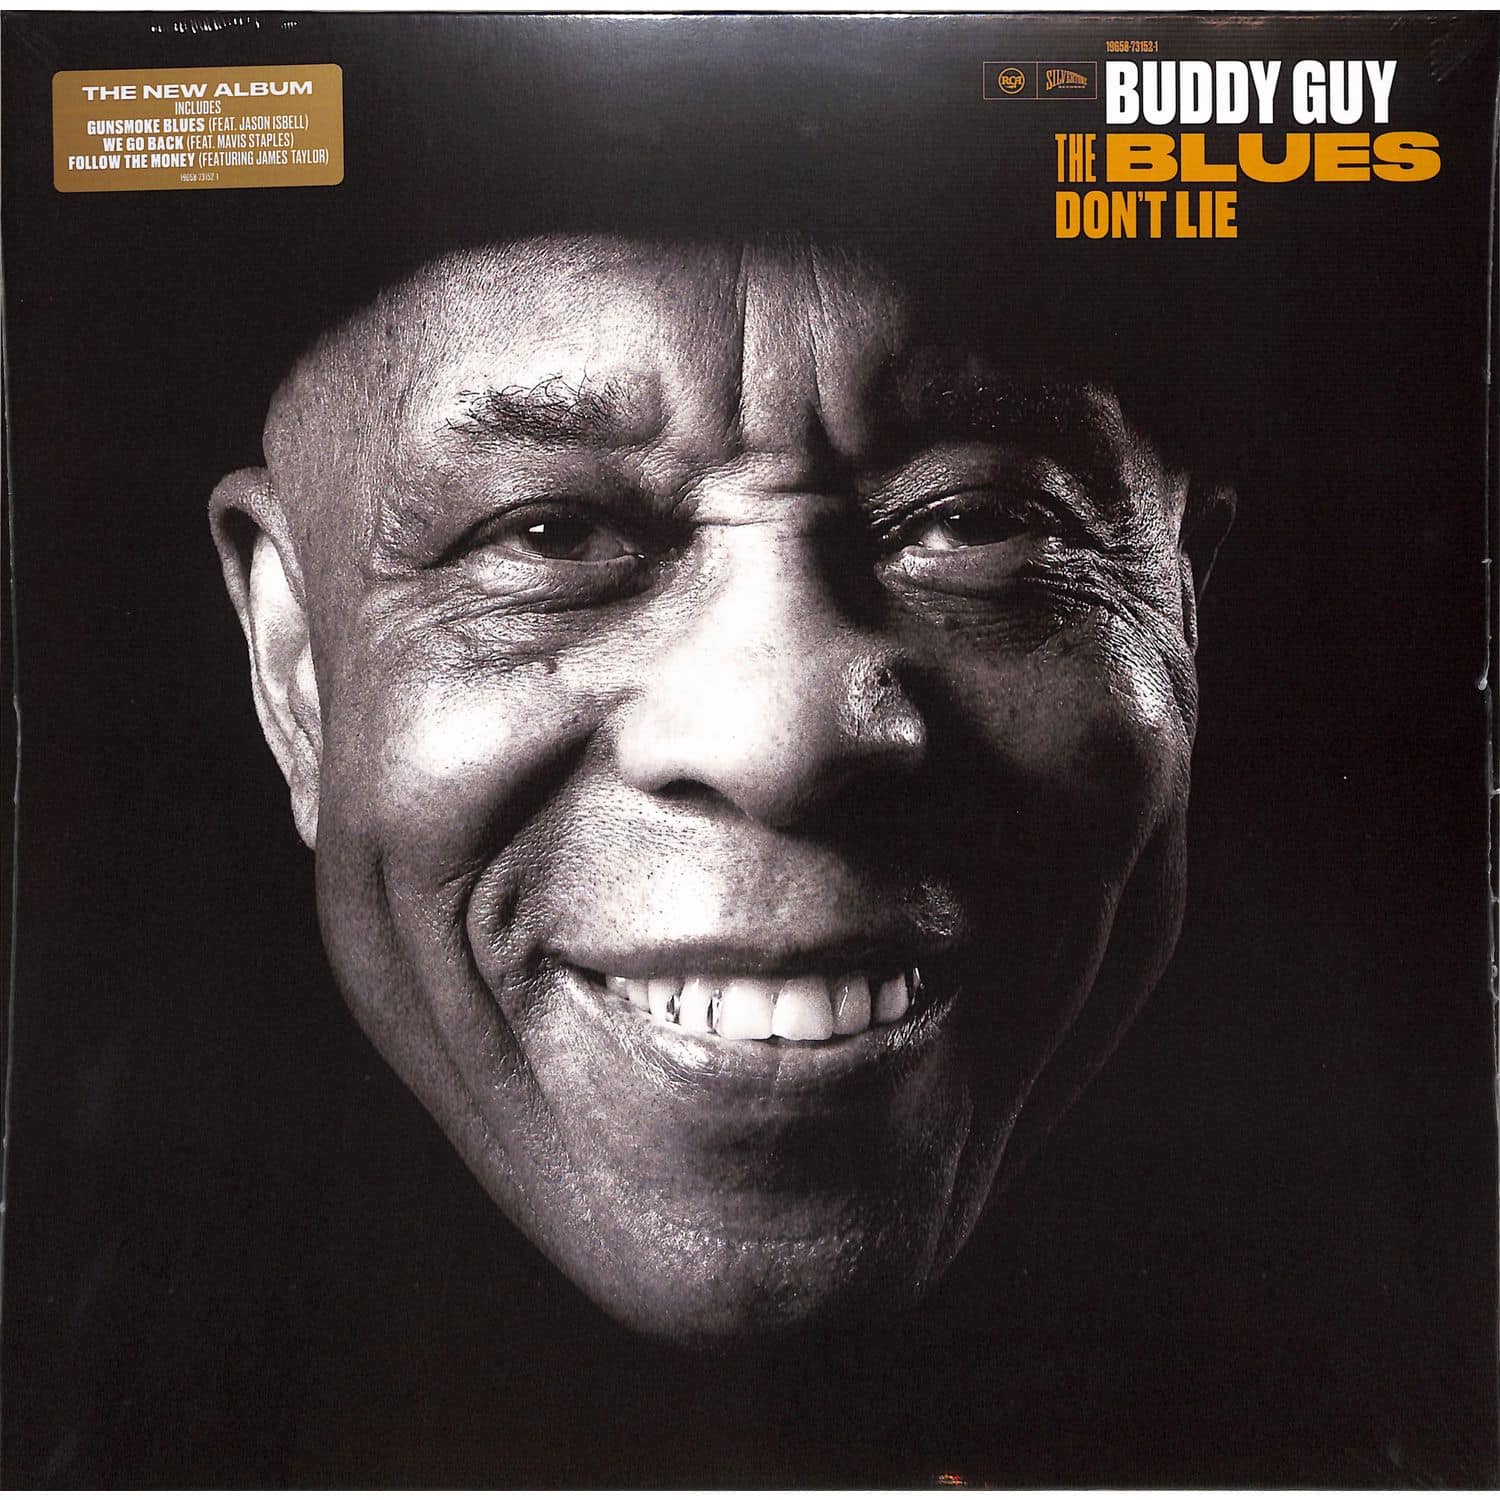 Buddy Guy - THE BLUES DON T LIE 